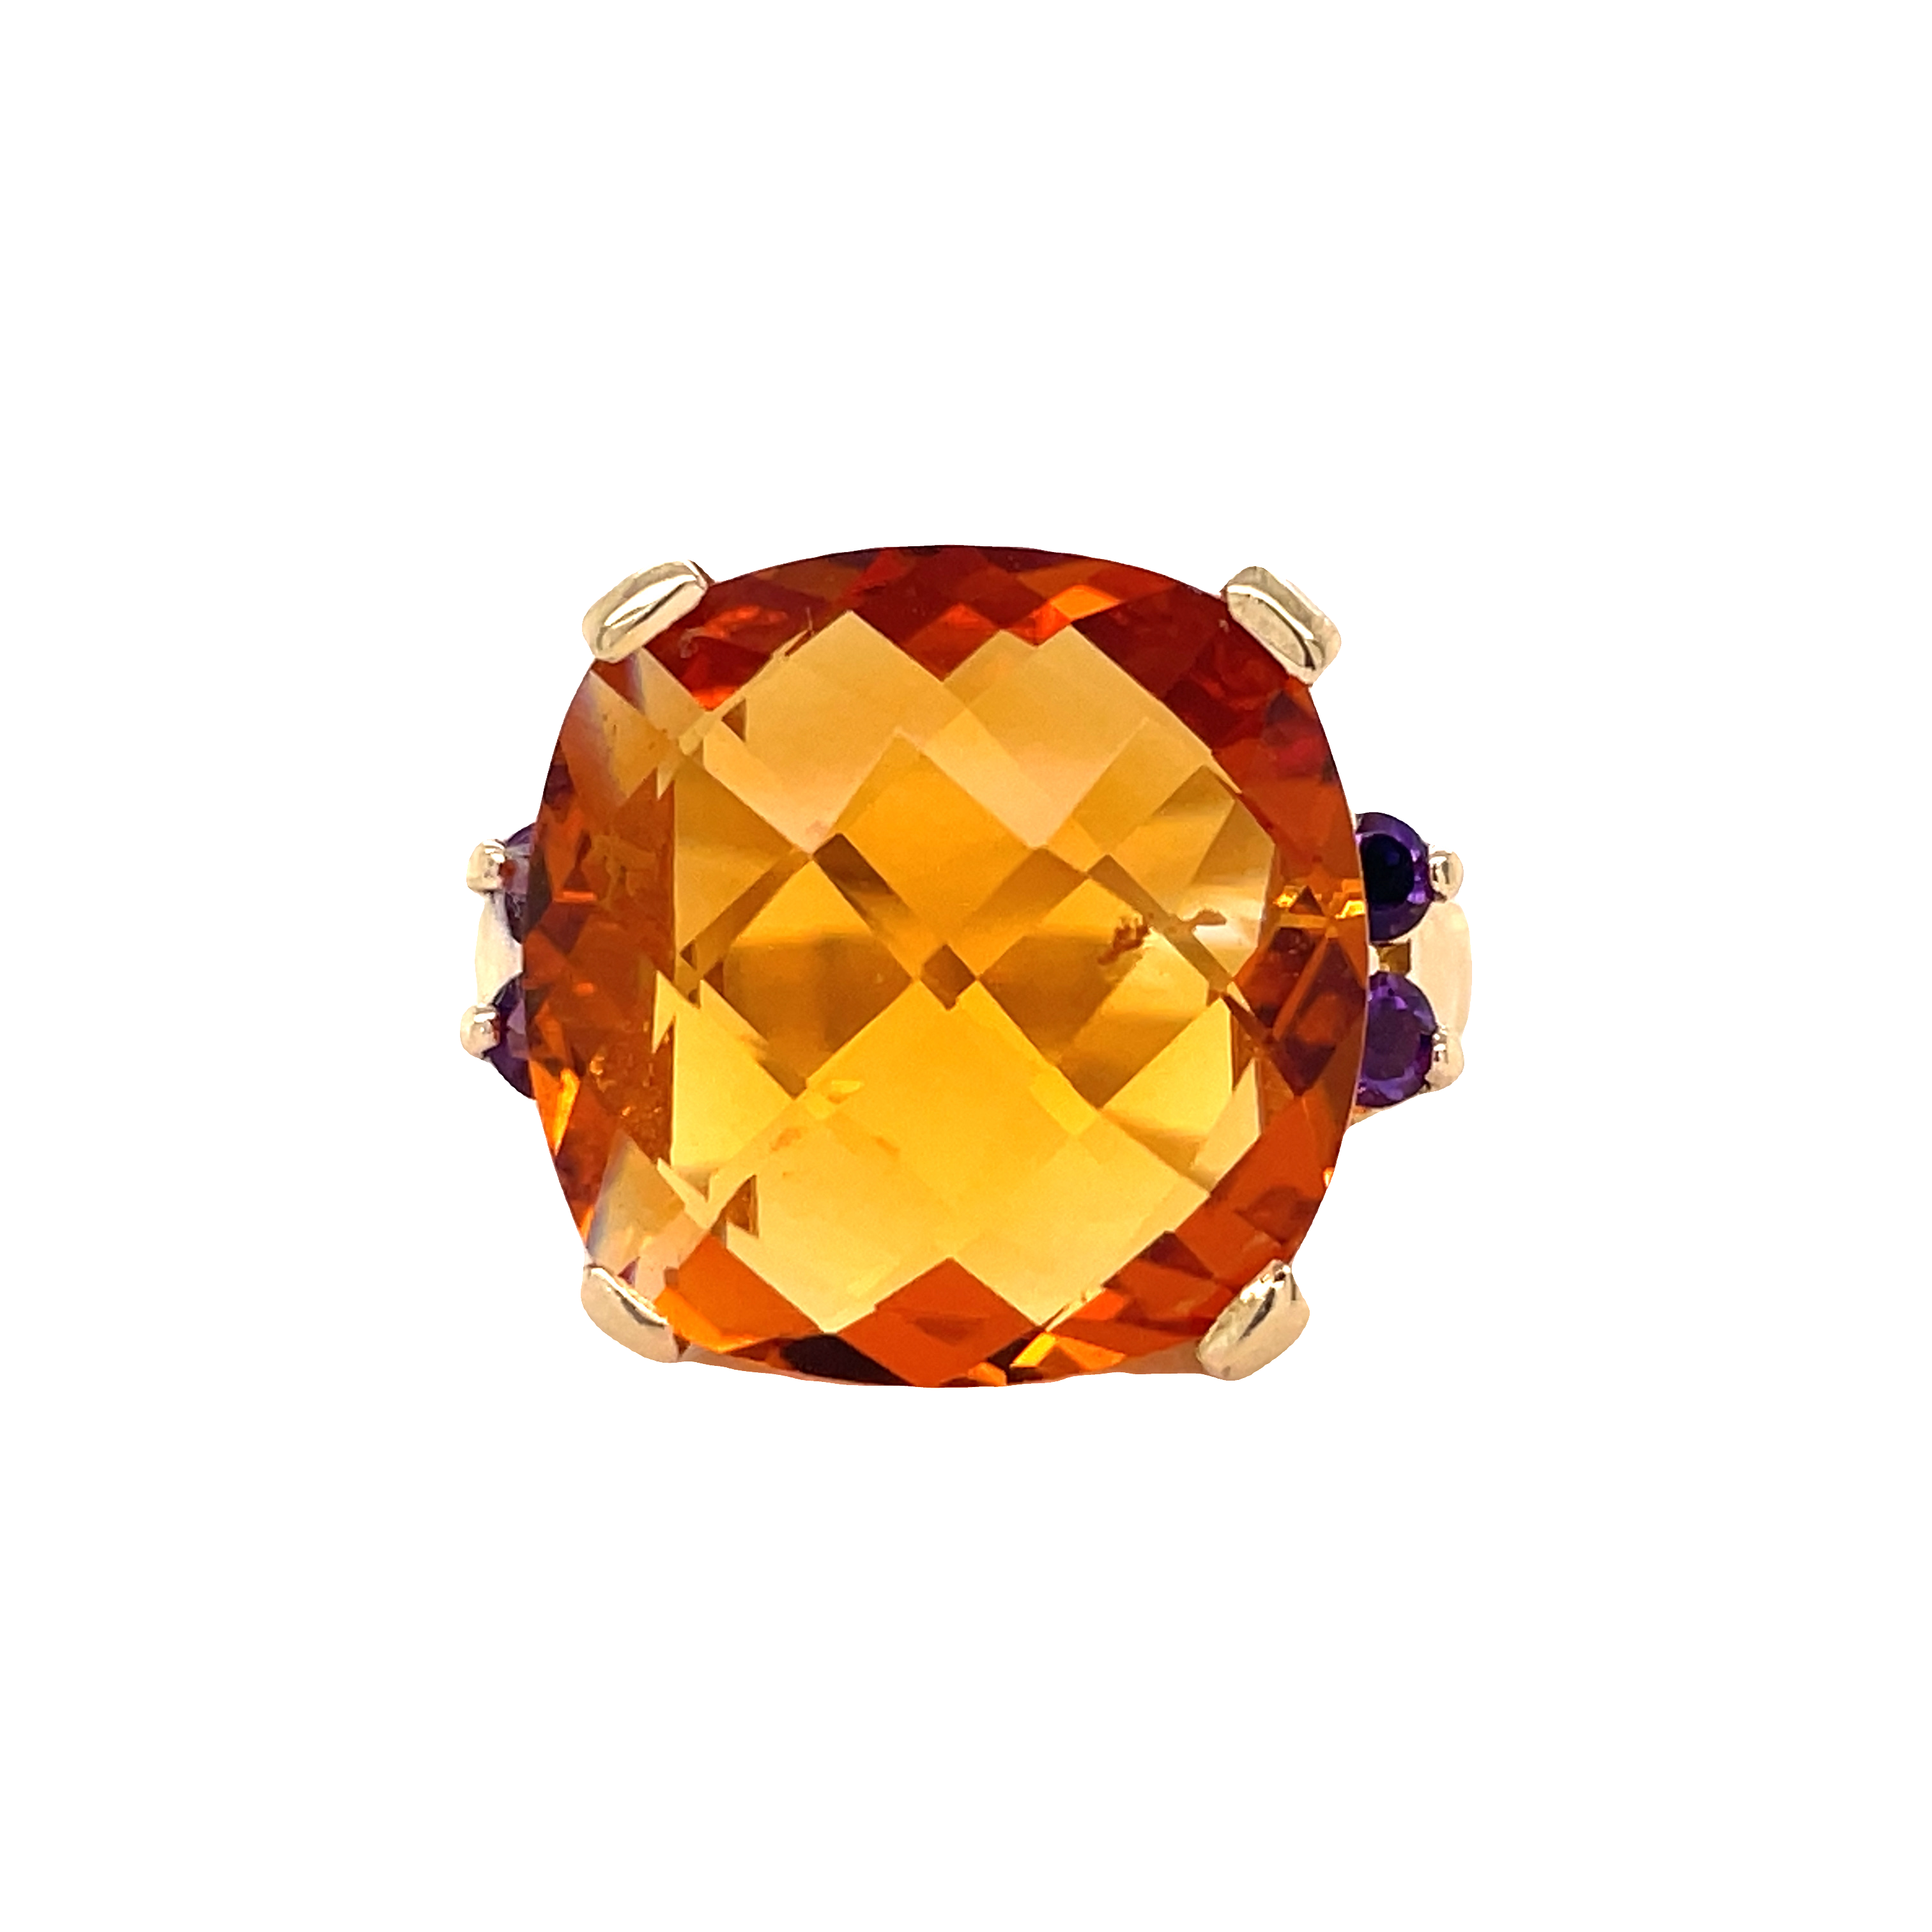 Beautiful estate jewelry ring.  14k yellow gold antique ring  Faceted citrine  15.00 mm   Round amethyst  Great condition.